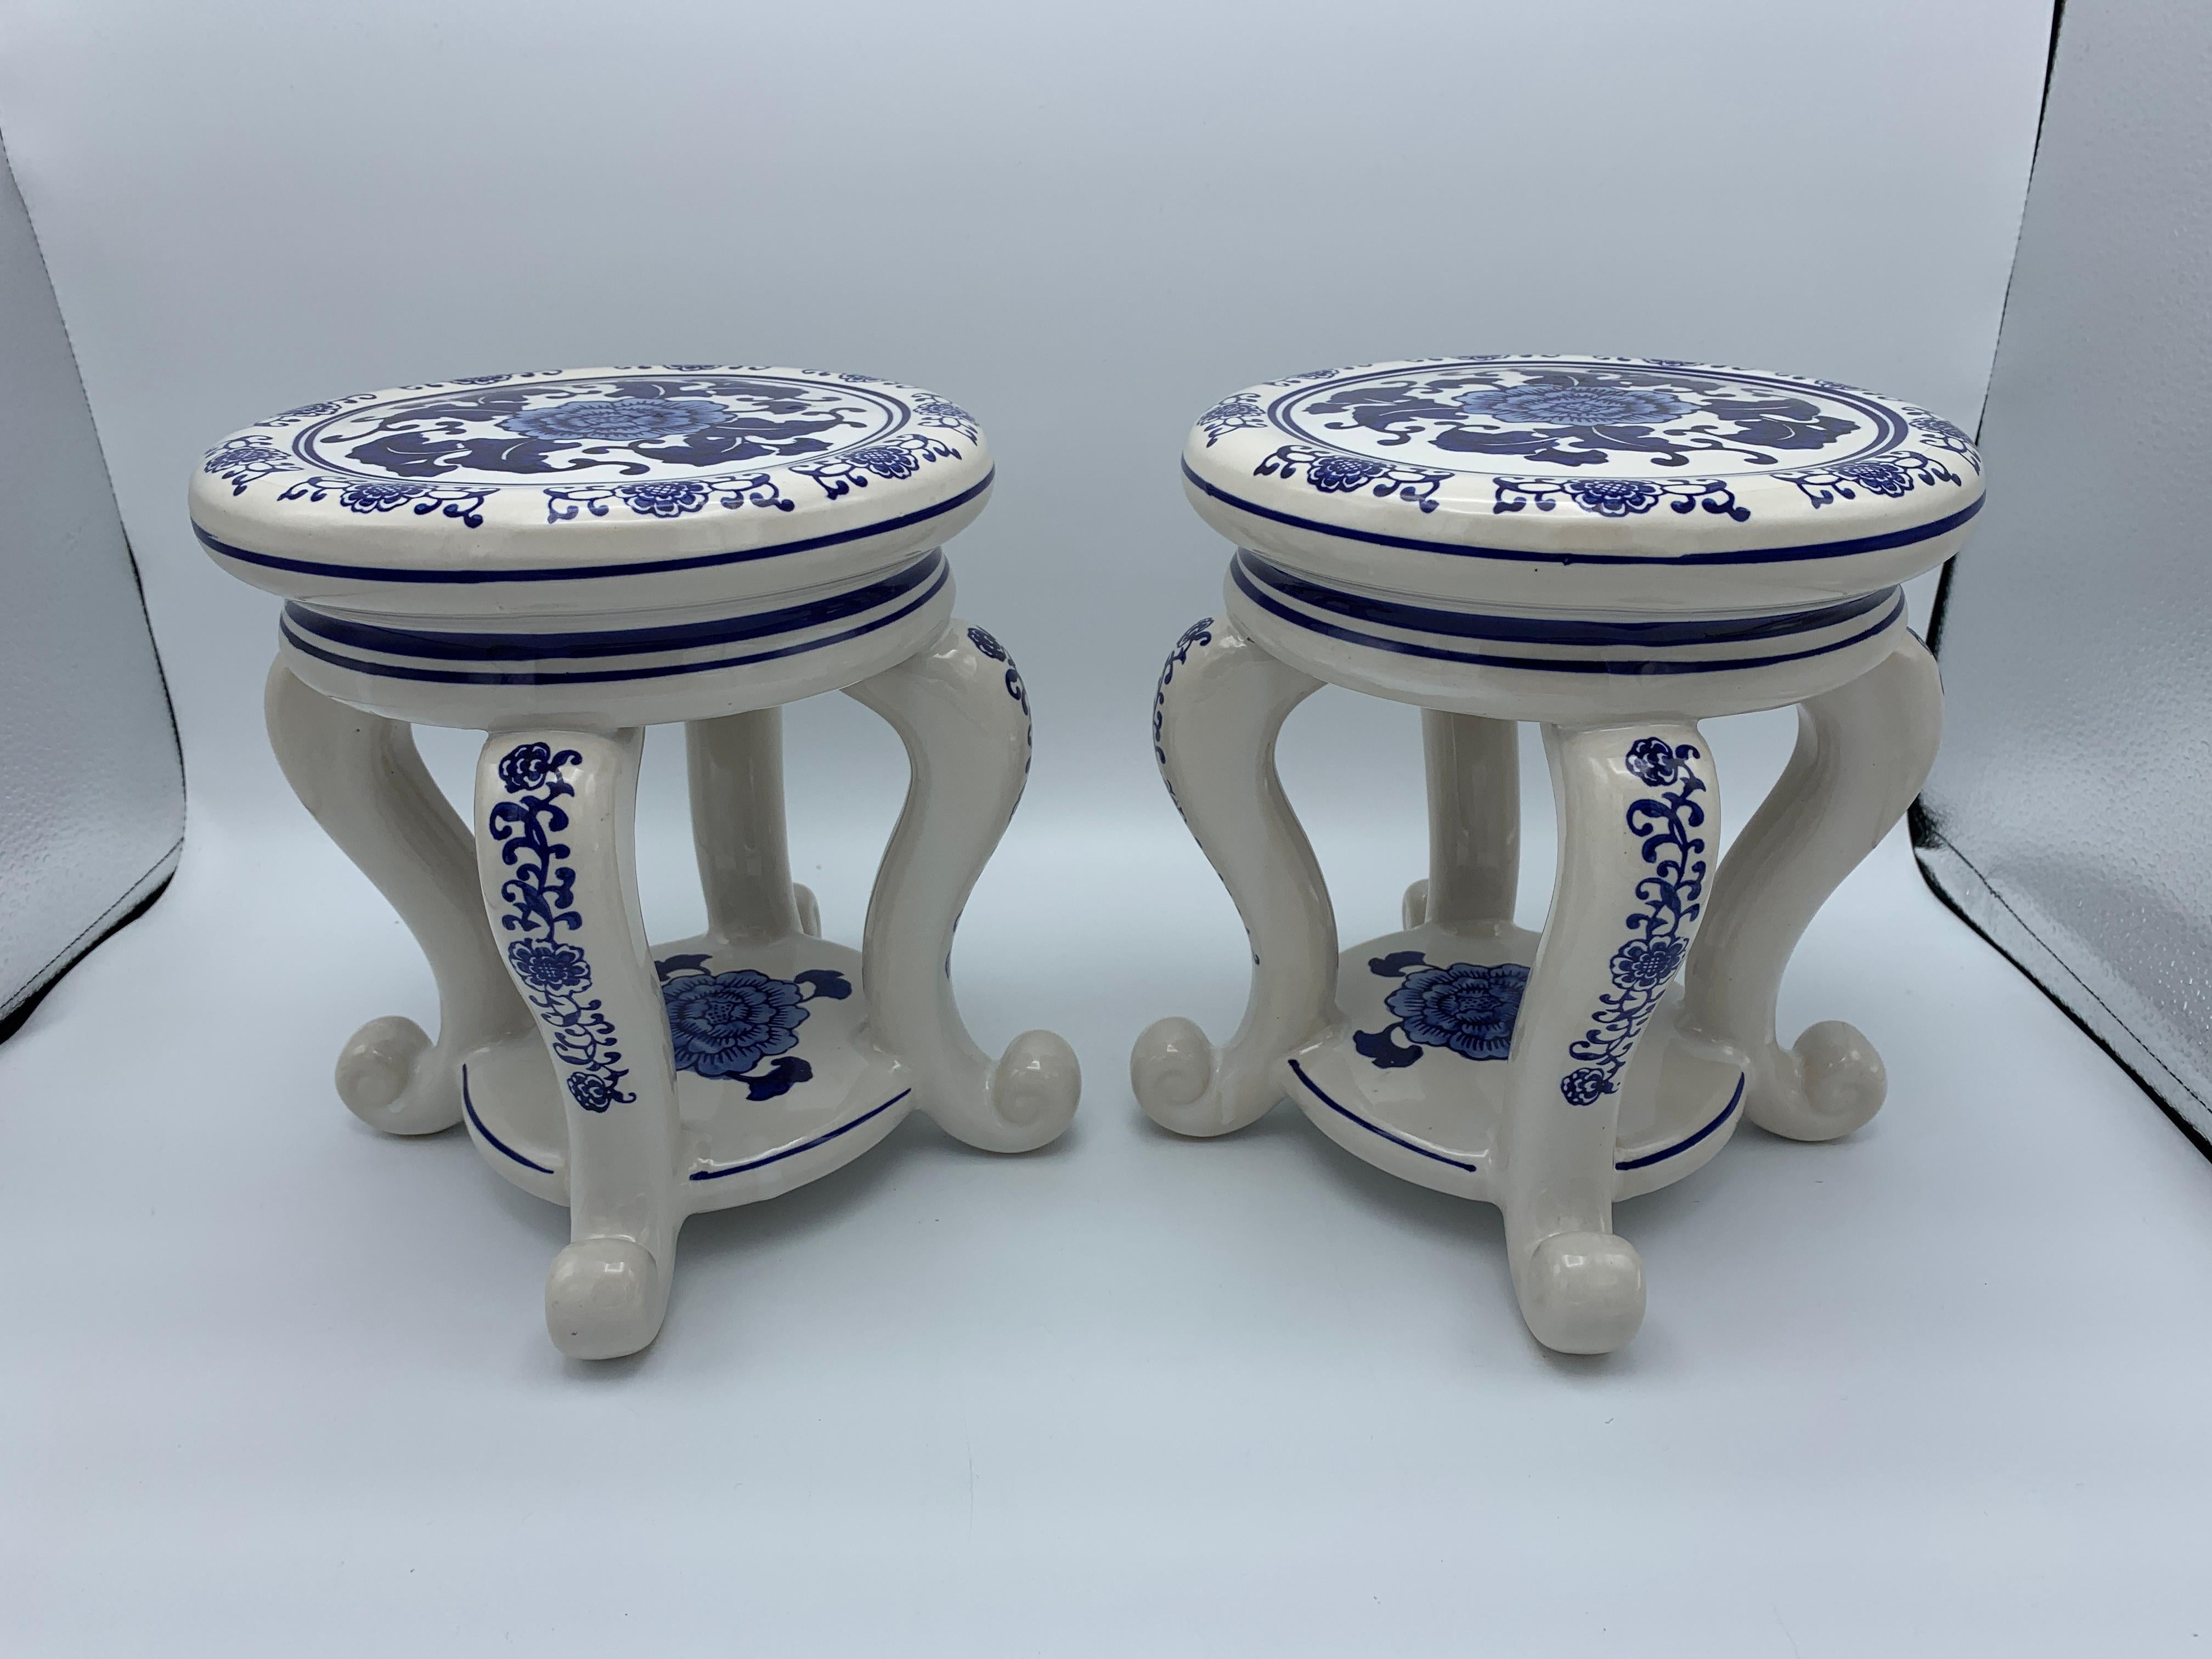 Painted 1980s Chinoiserie Blue and White Ceramic Plant Stands with Peony Motif, Pair For Sale